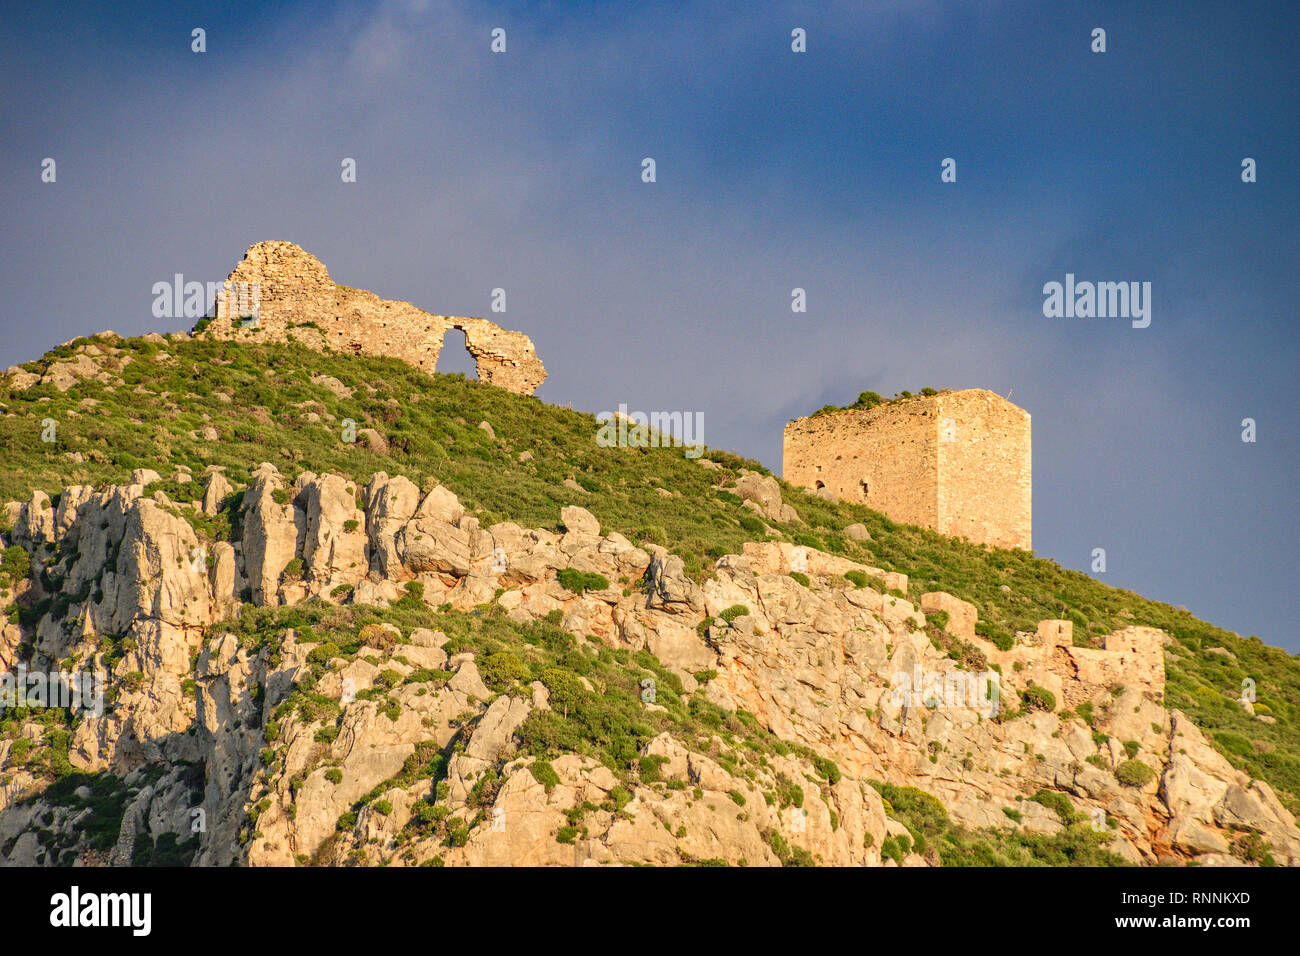 View of the fortress and the walls in Monemvasia, a medieval castle town located in Lakonia, Peloponnese, Greece. Monemvasia. Stock Photo